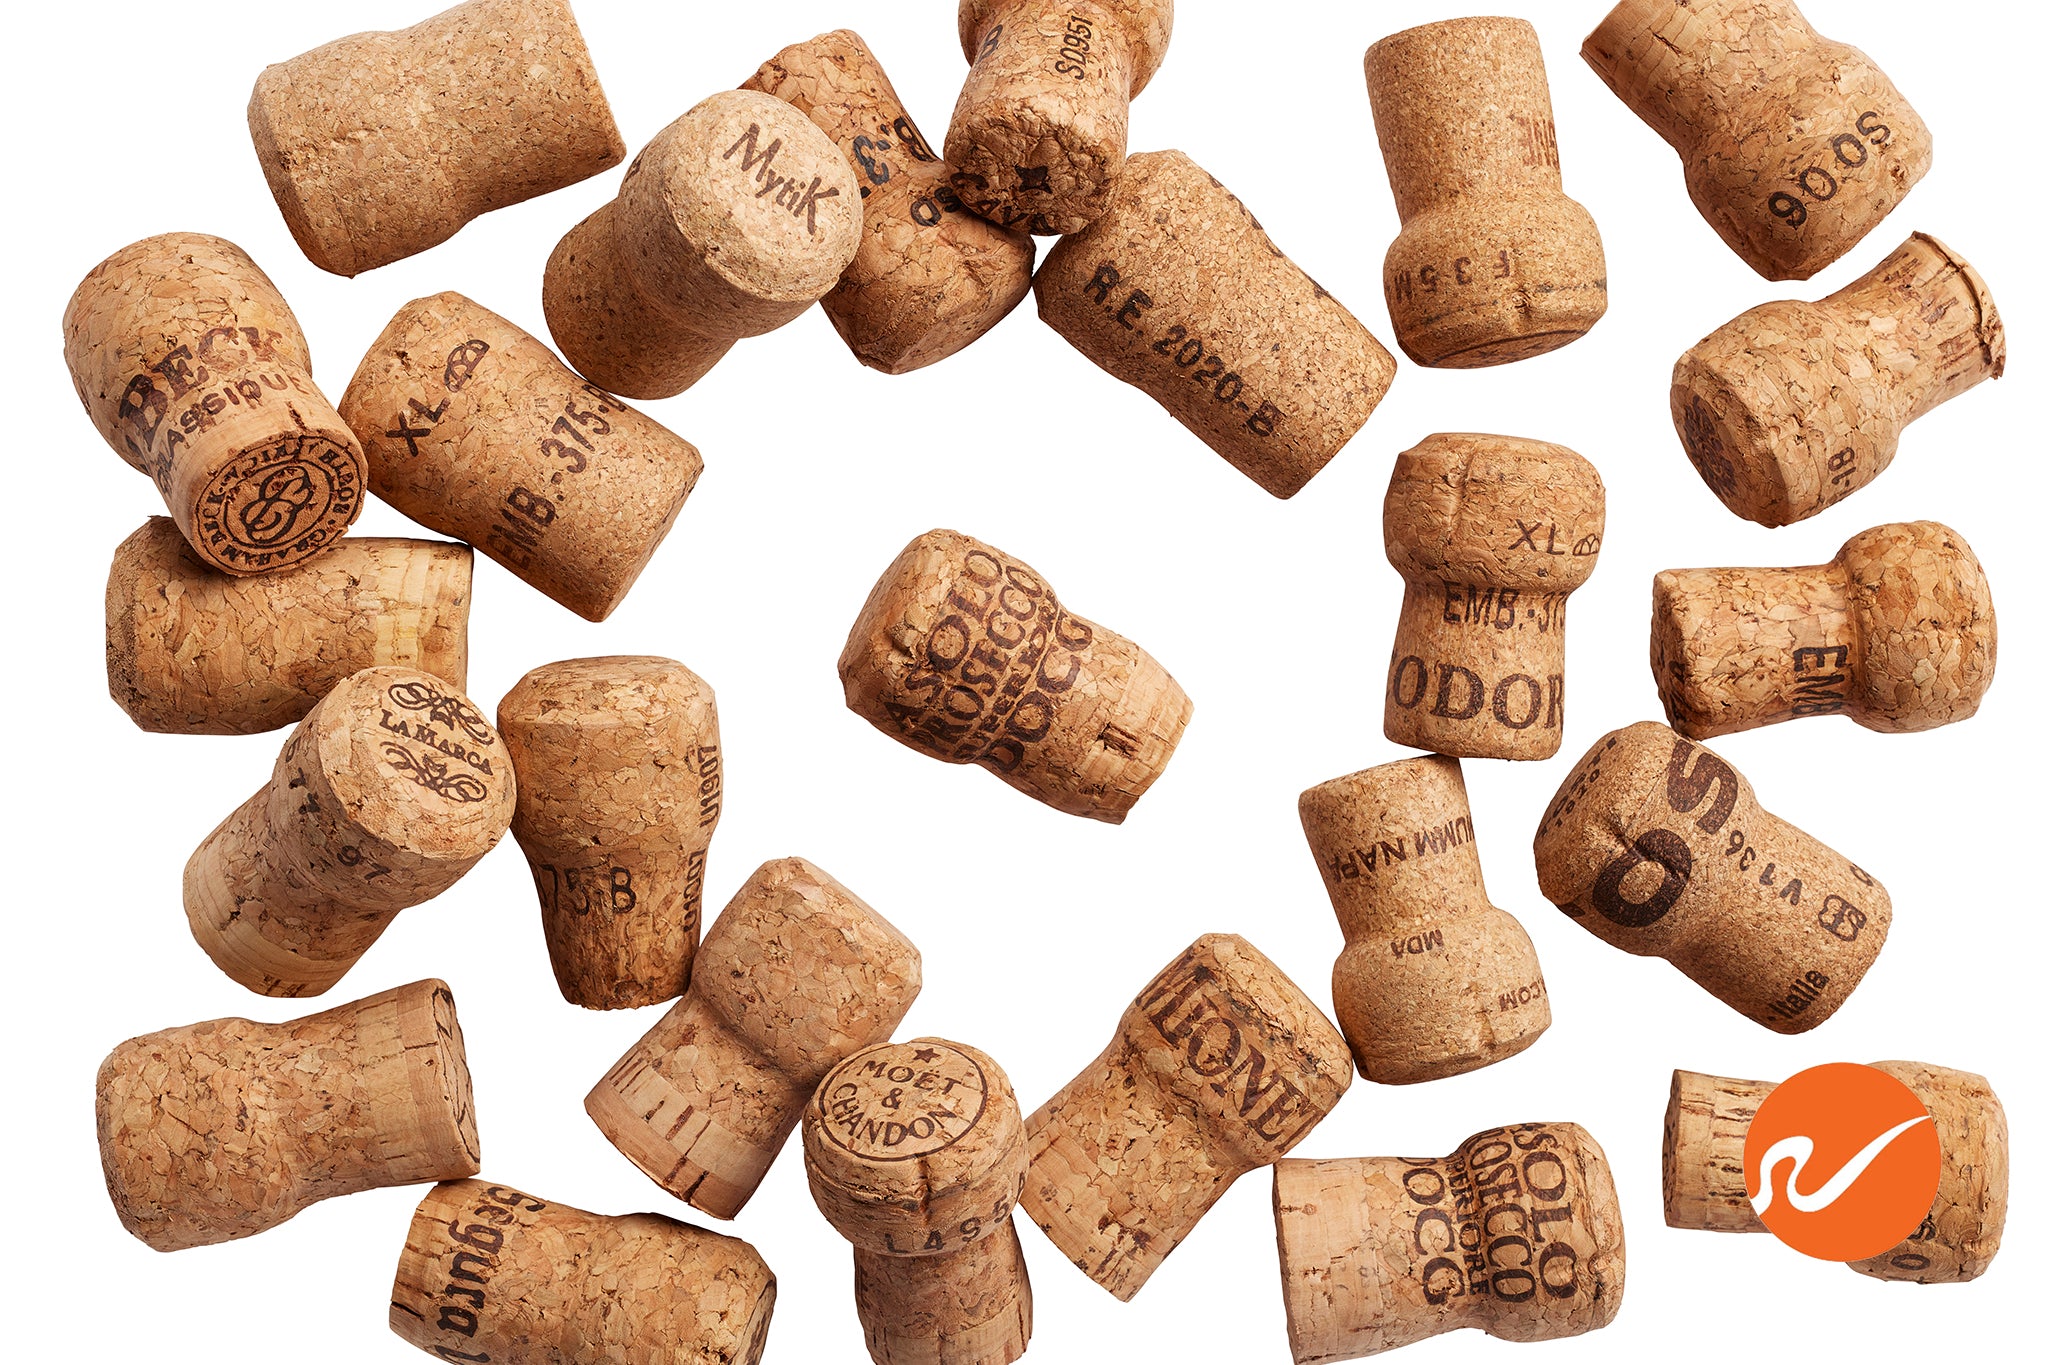 Used Champagne Corks - Buy recycled champagne corks